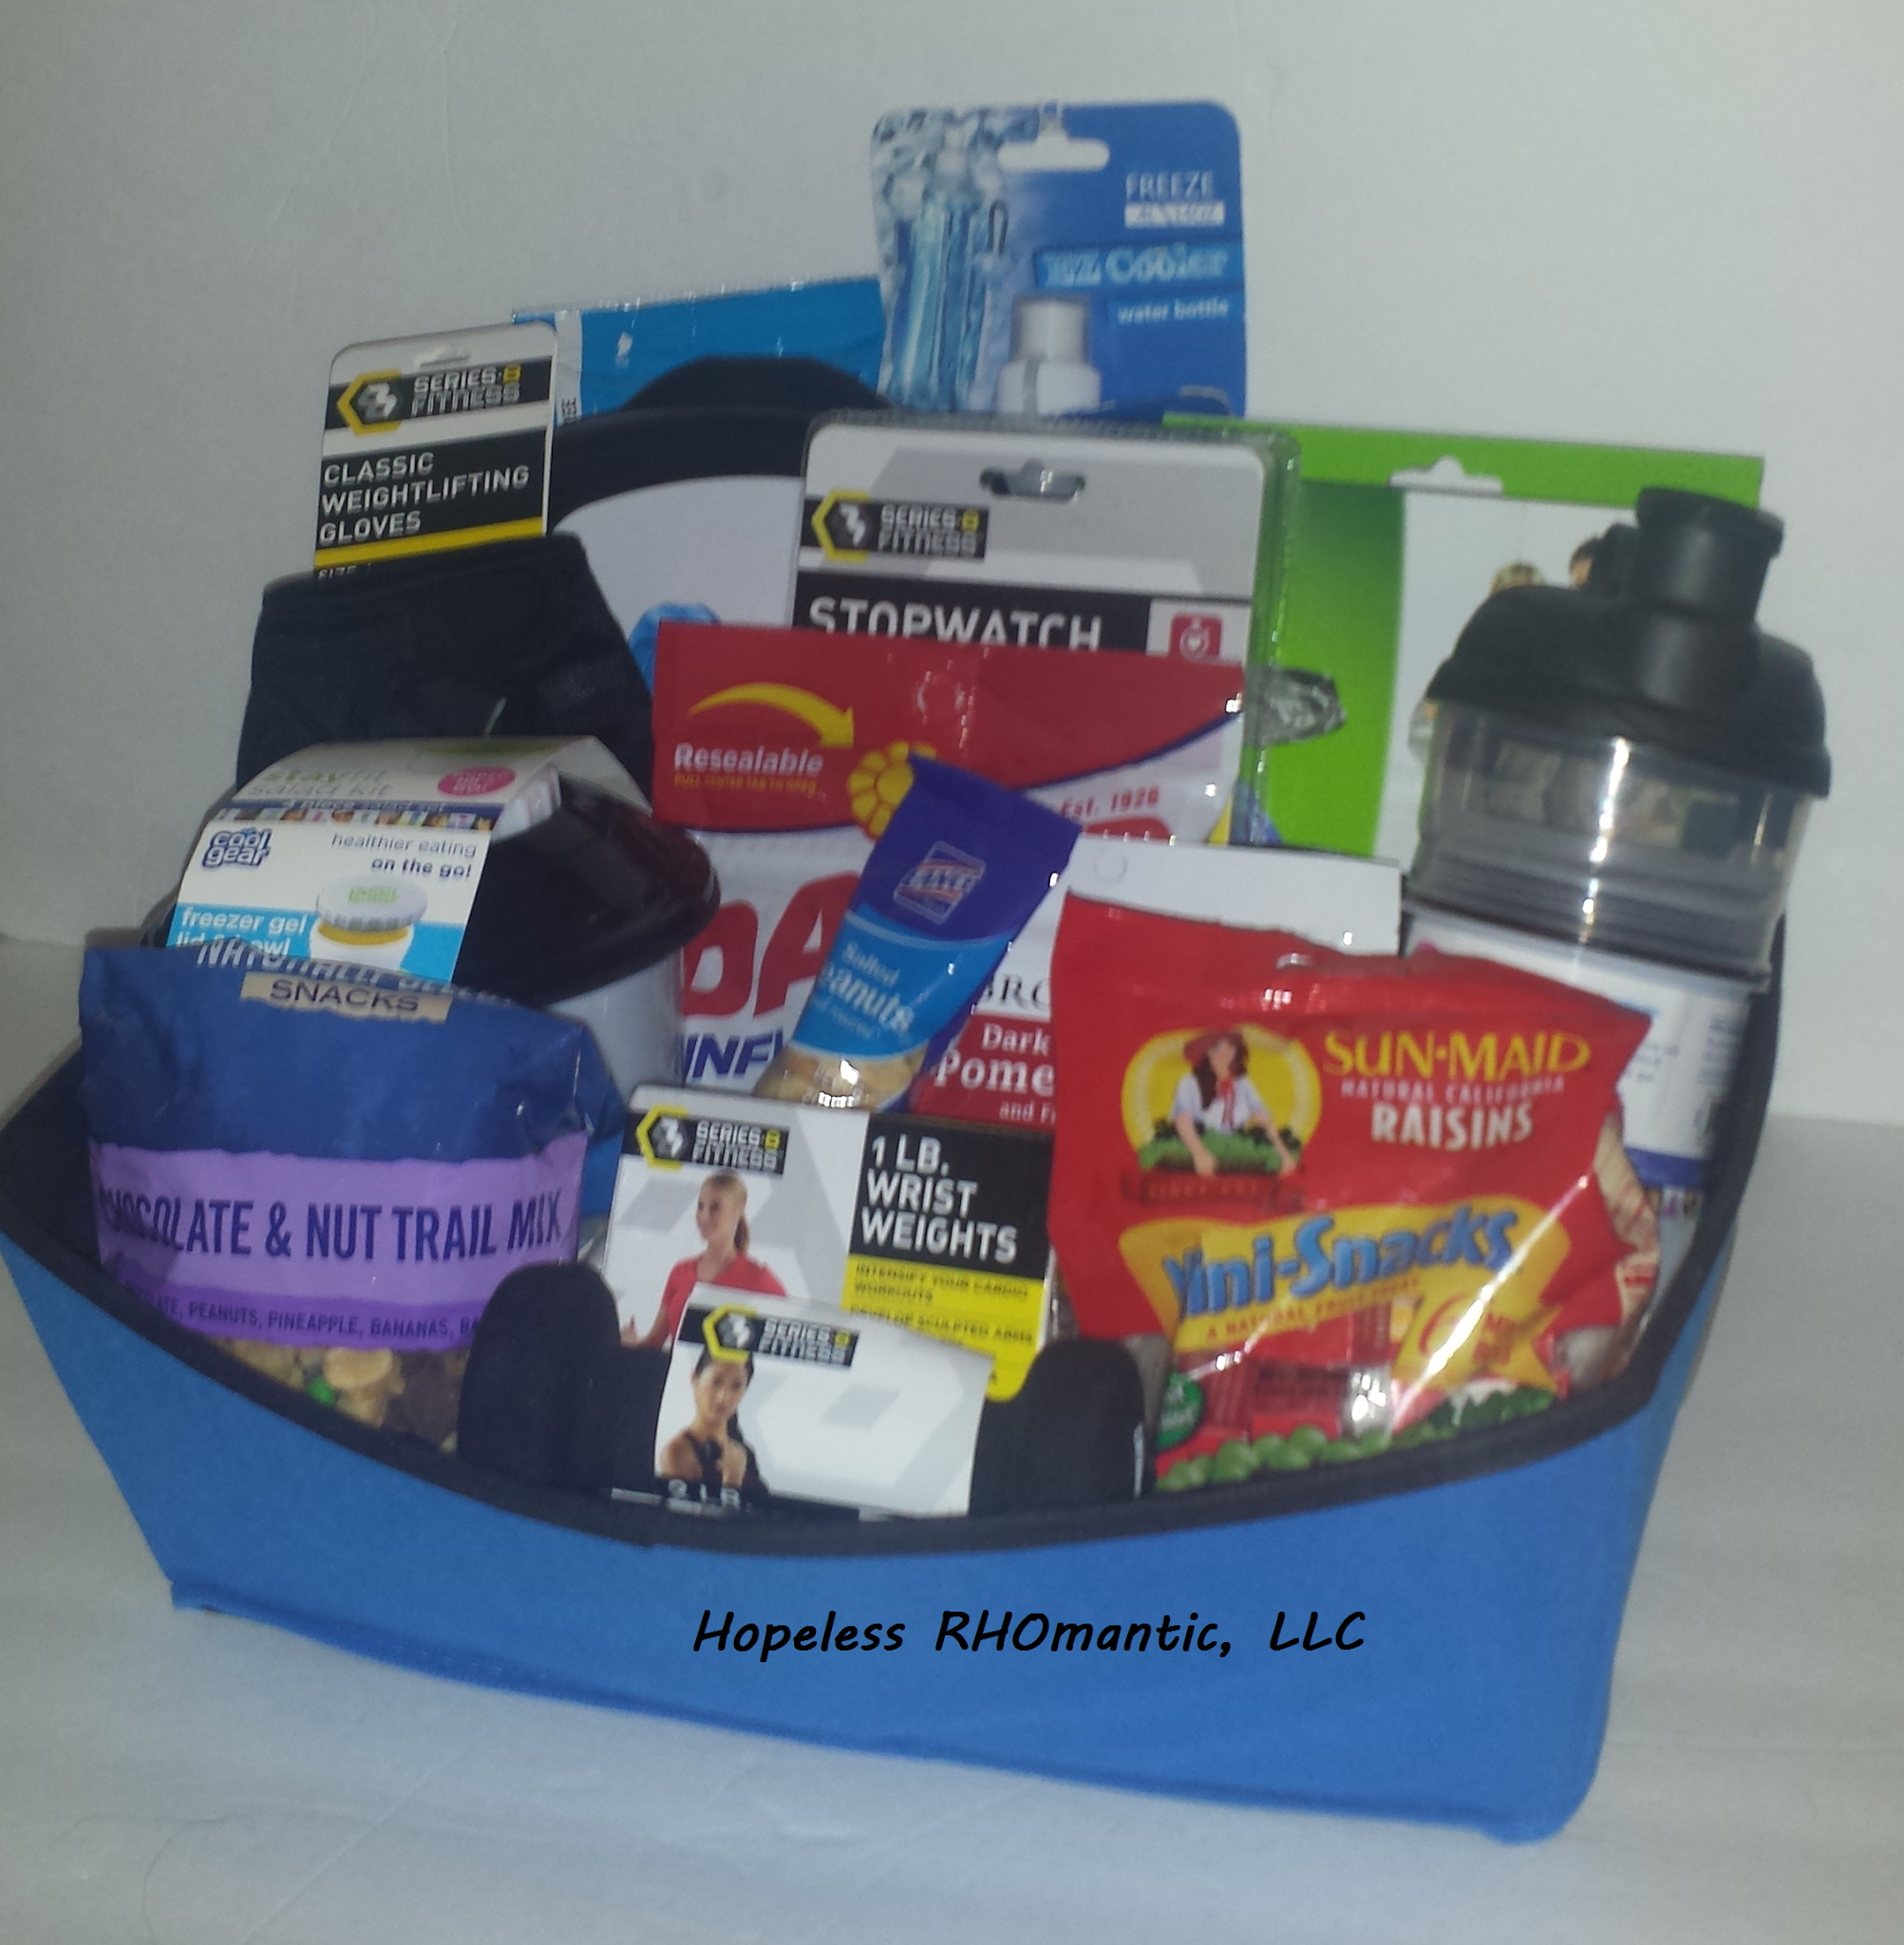 Top 10 gym basket gift ideas and inspiration